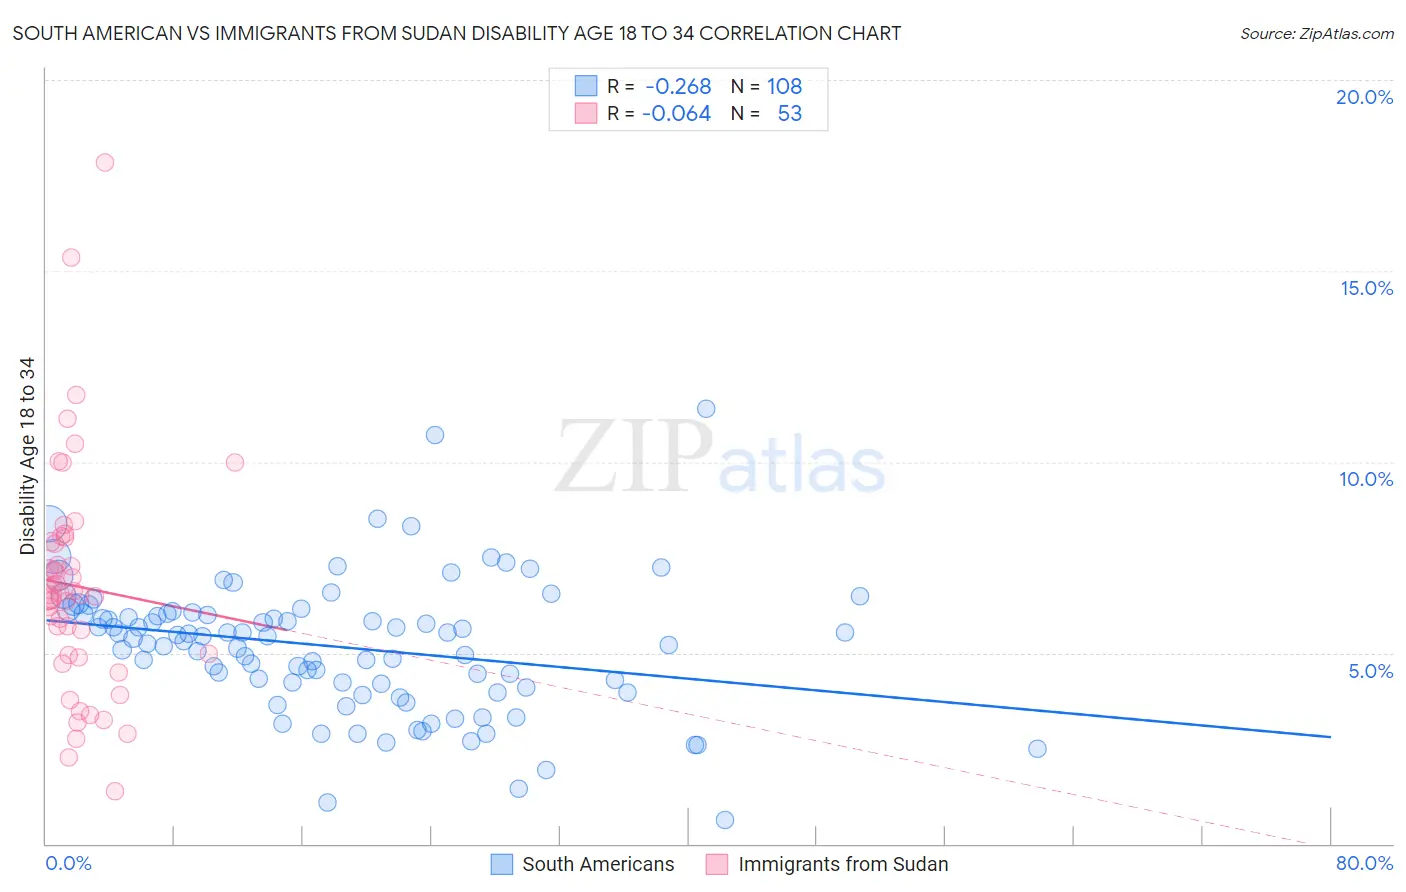 South American vs Immigrants from Sudan Disability Age 18 to 34